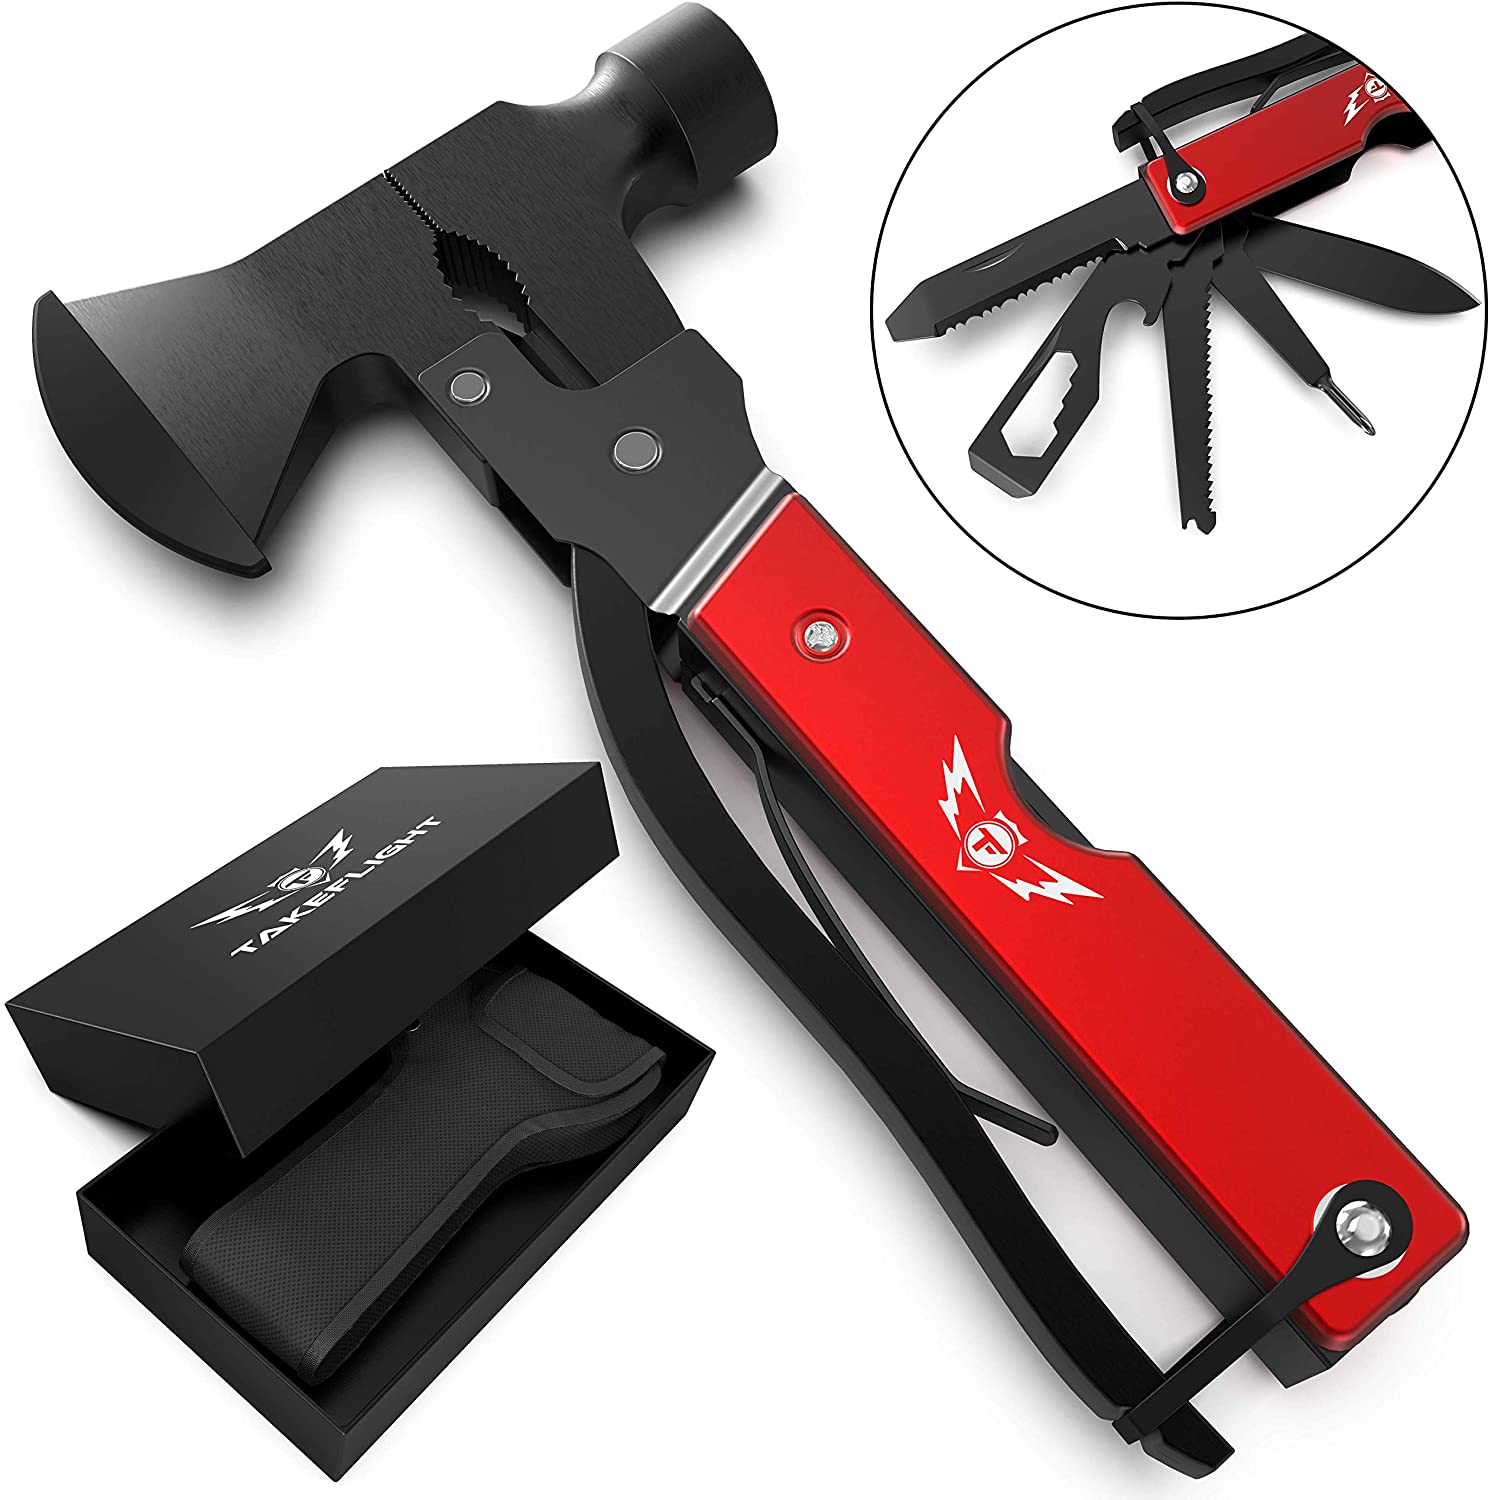 Camping Multitool for Survival Gear - Multipurpose Tool Gadgets for Men and Women | Camping Tools with Accessories for Hiking Gear | Equipment includes Tools like Hammer, Knive, Screwdrivers, Saw